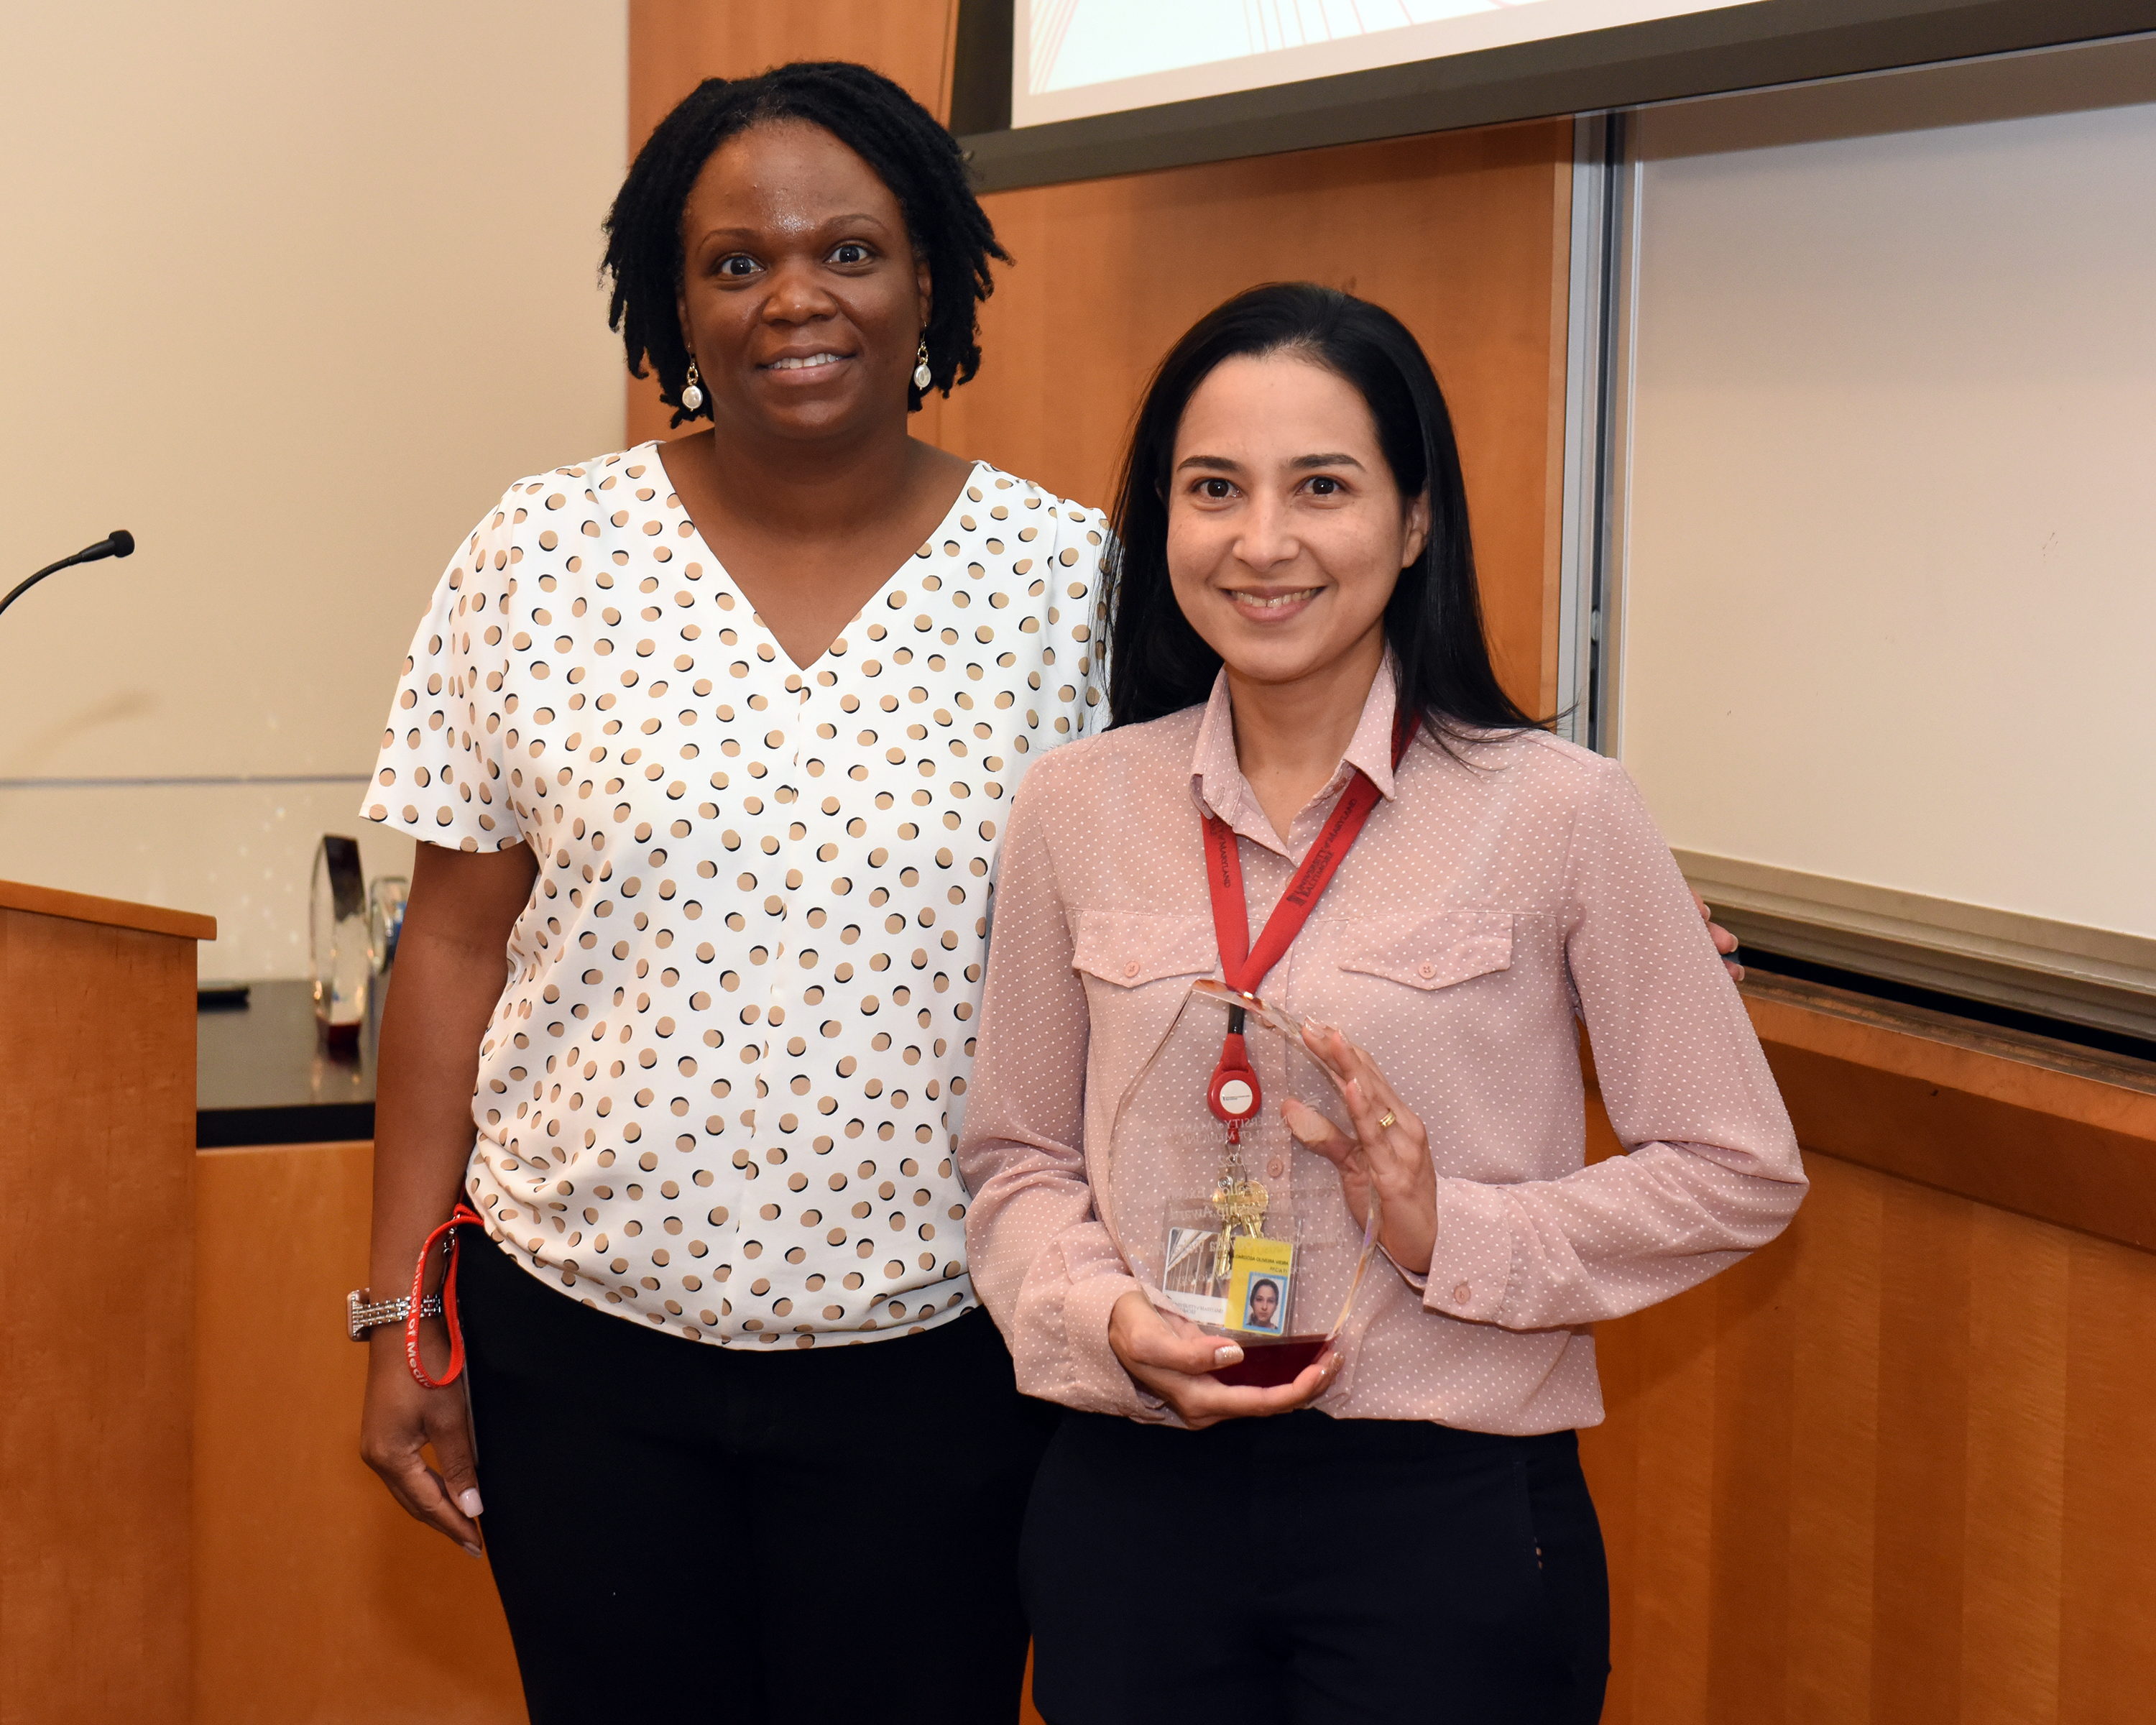 Dr. Tanya Webb is a Black woman with black curly hair, wearing a black speckled white blouse. She is standing next to Daiana  Cardoso Oliveira Viera who is a Latina woman wearing a red and white blouse, smiling and holding her award.